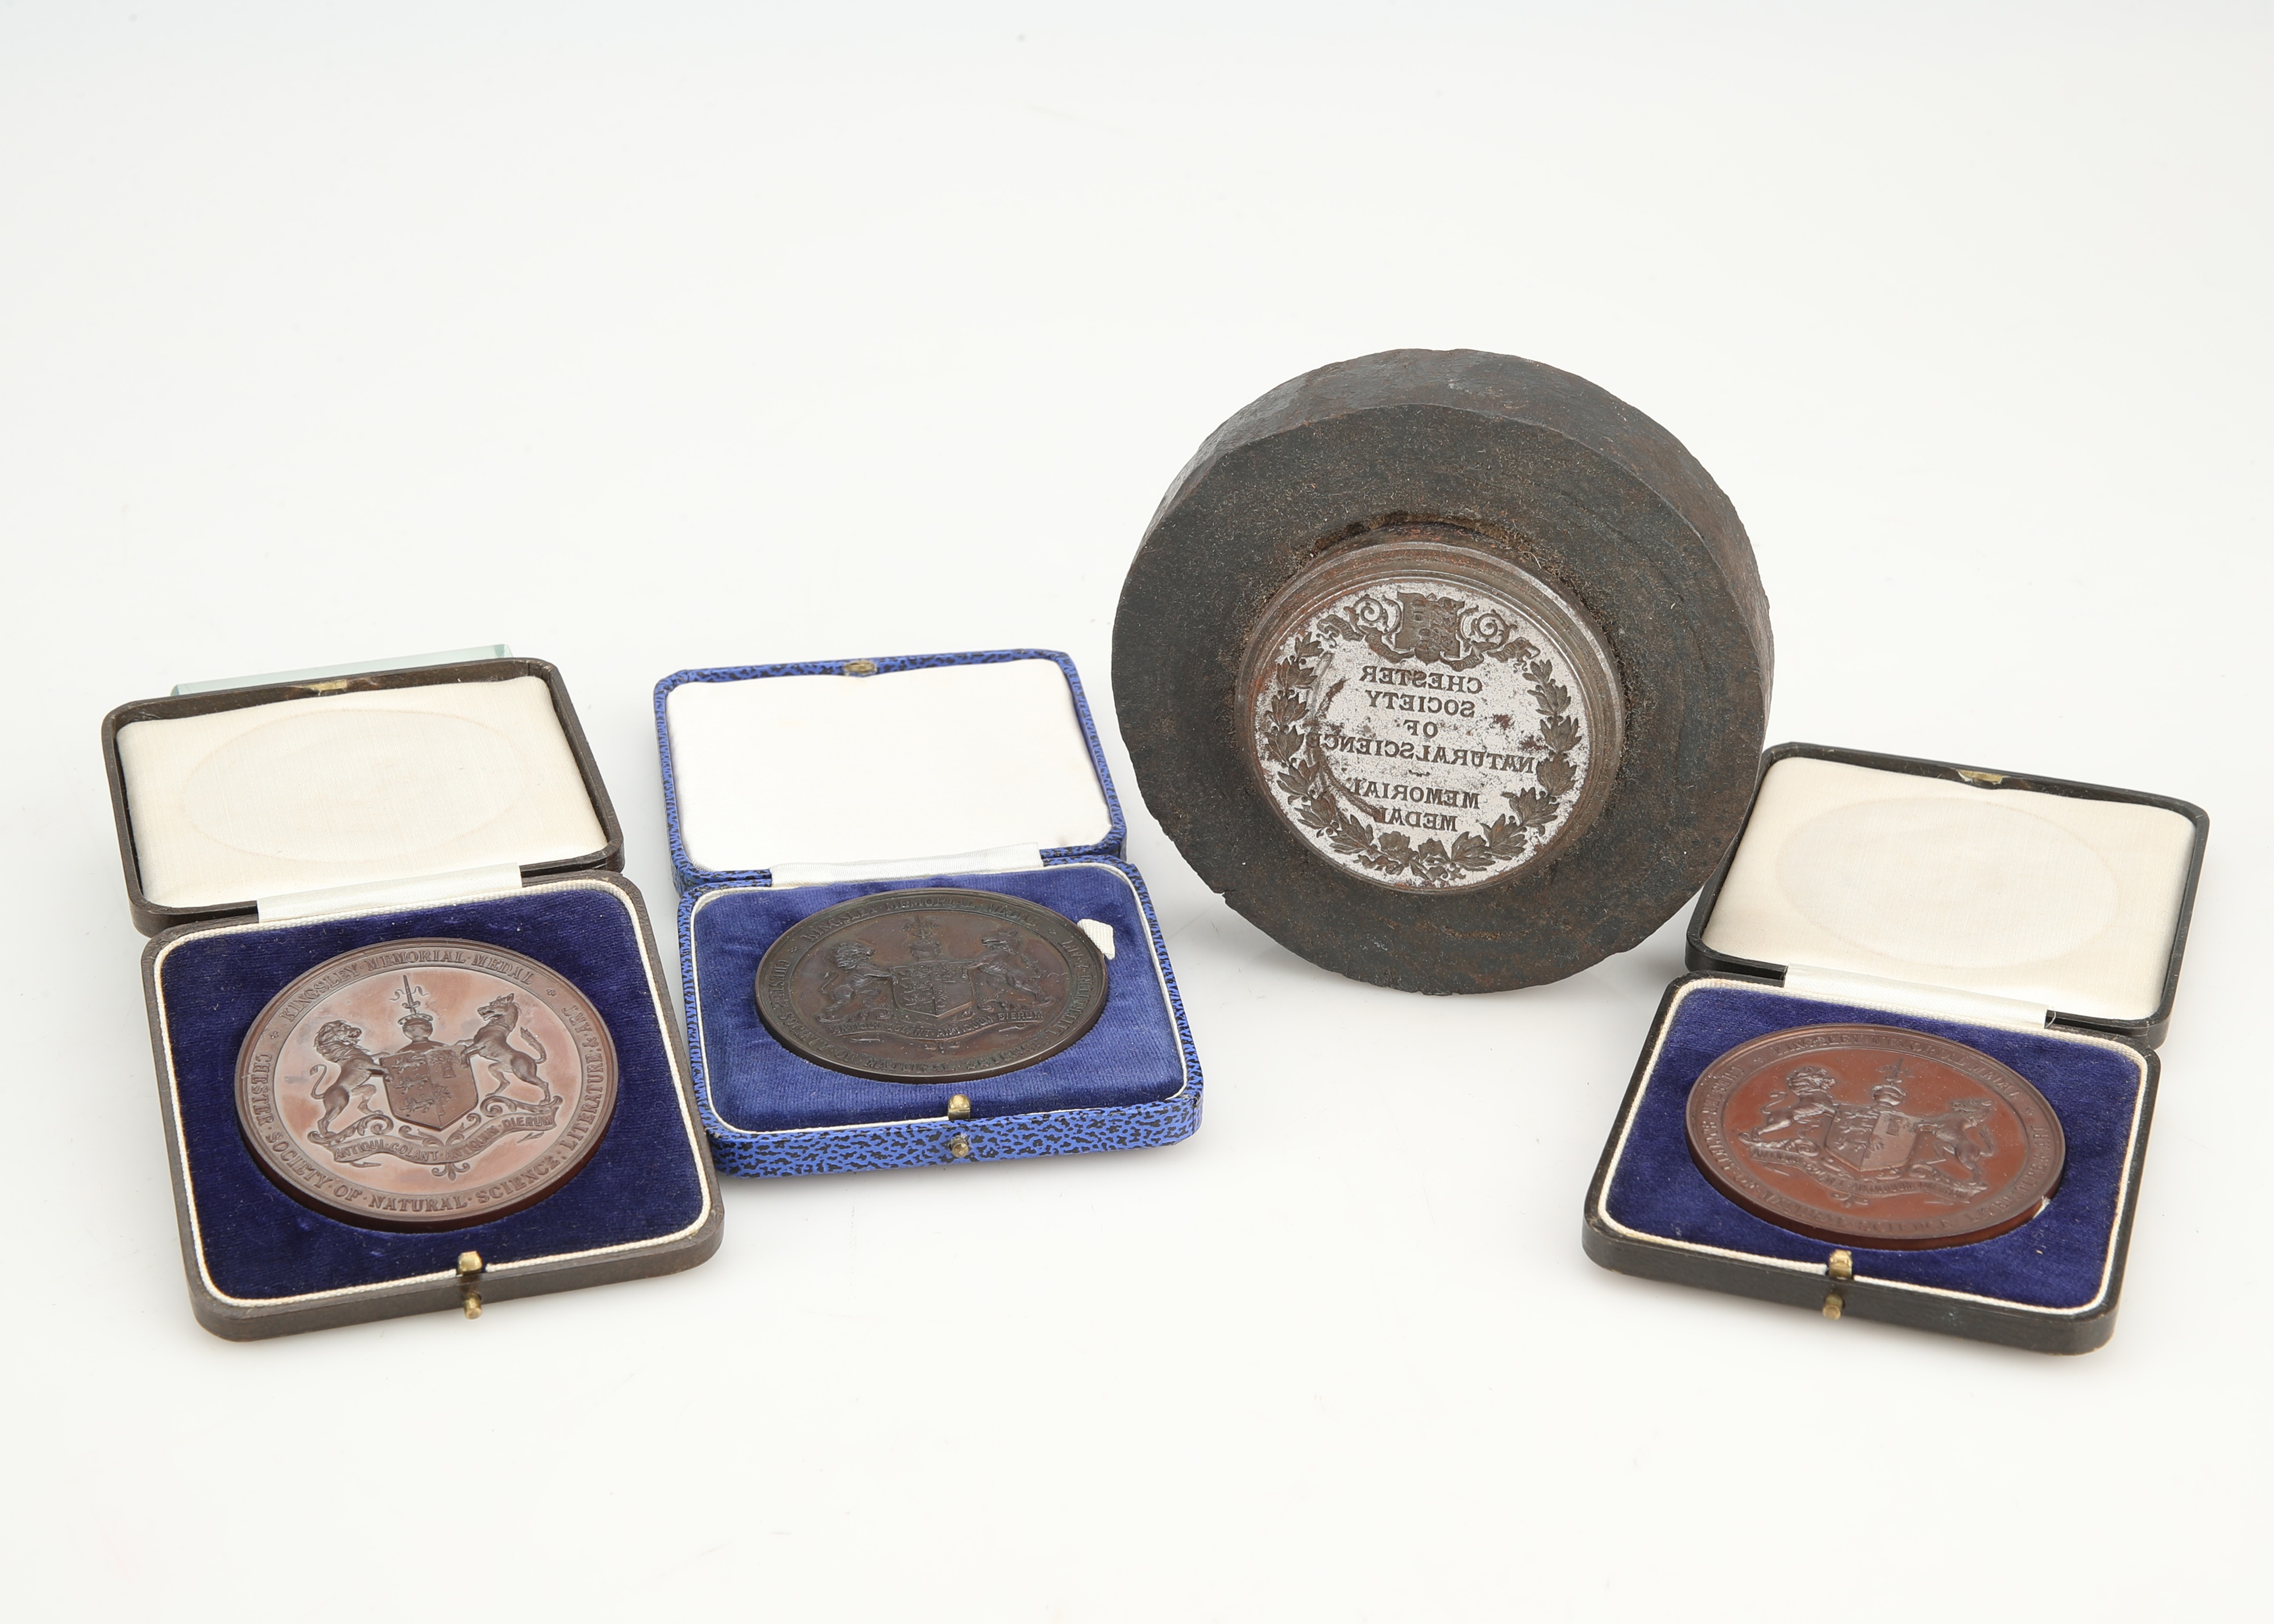 Chester Society of Natural Science, Literature & Art Kingsley Memorial Medals